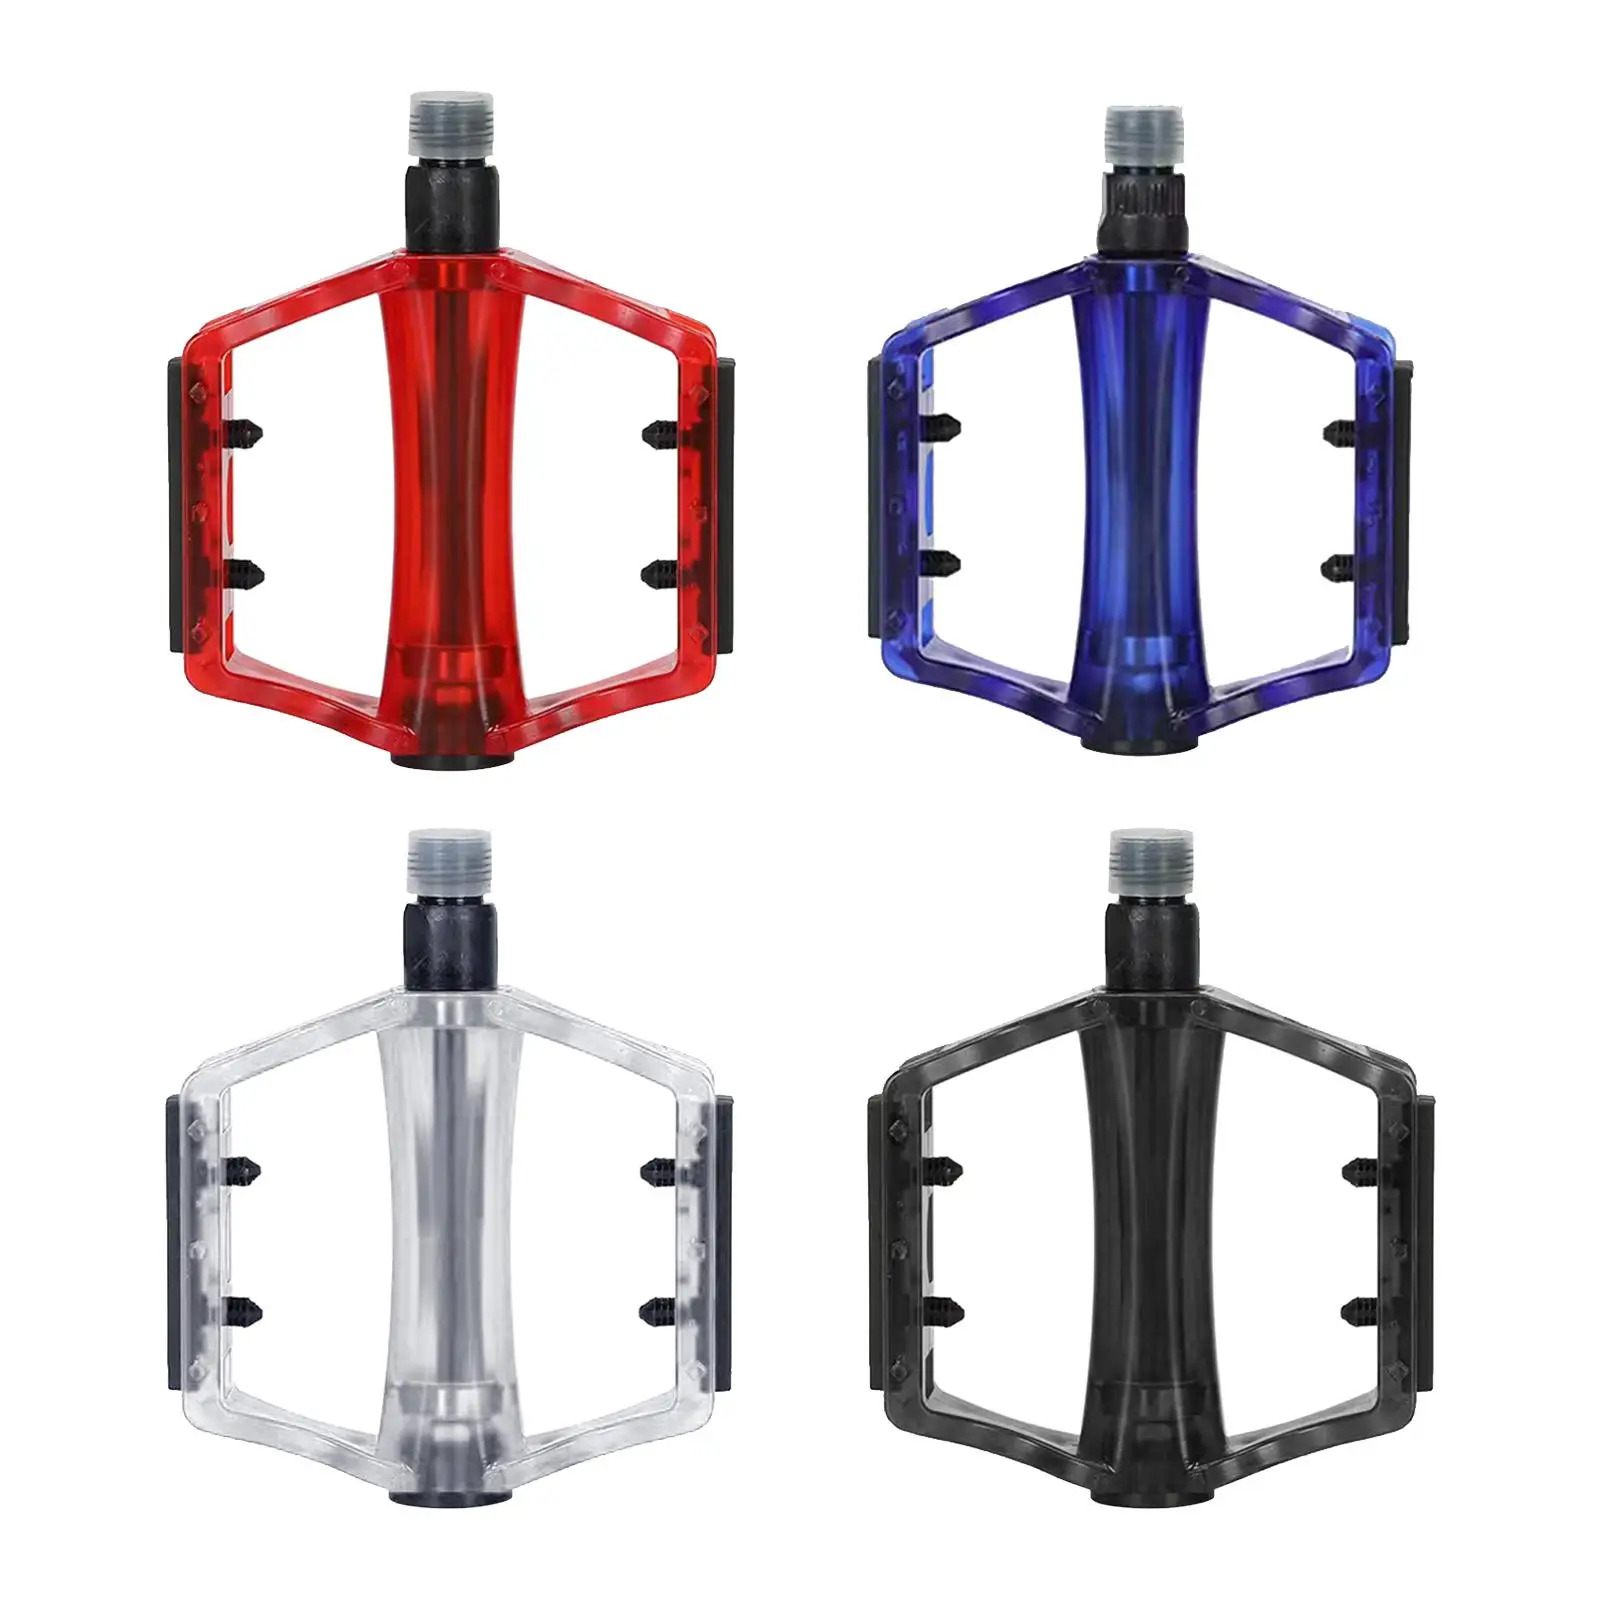 2Pcs Bike Pedals Bicycle Pedals Universal Lightweight Cycling Pedals Parts for Road Bike Mountain Bike Adult Bikes Equipment